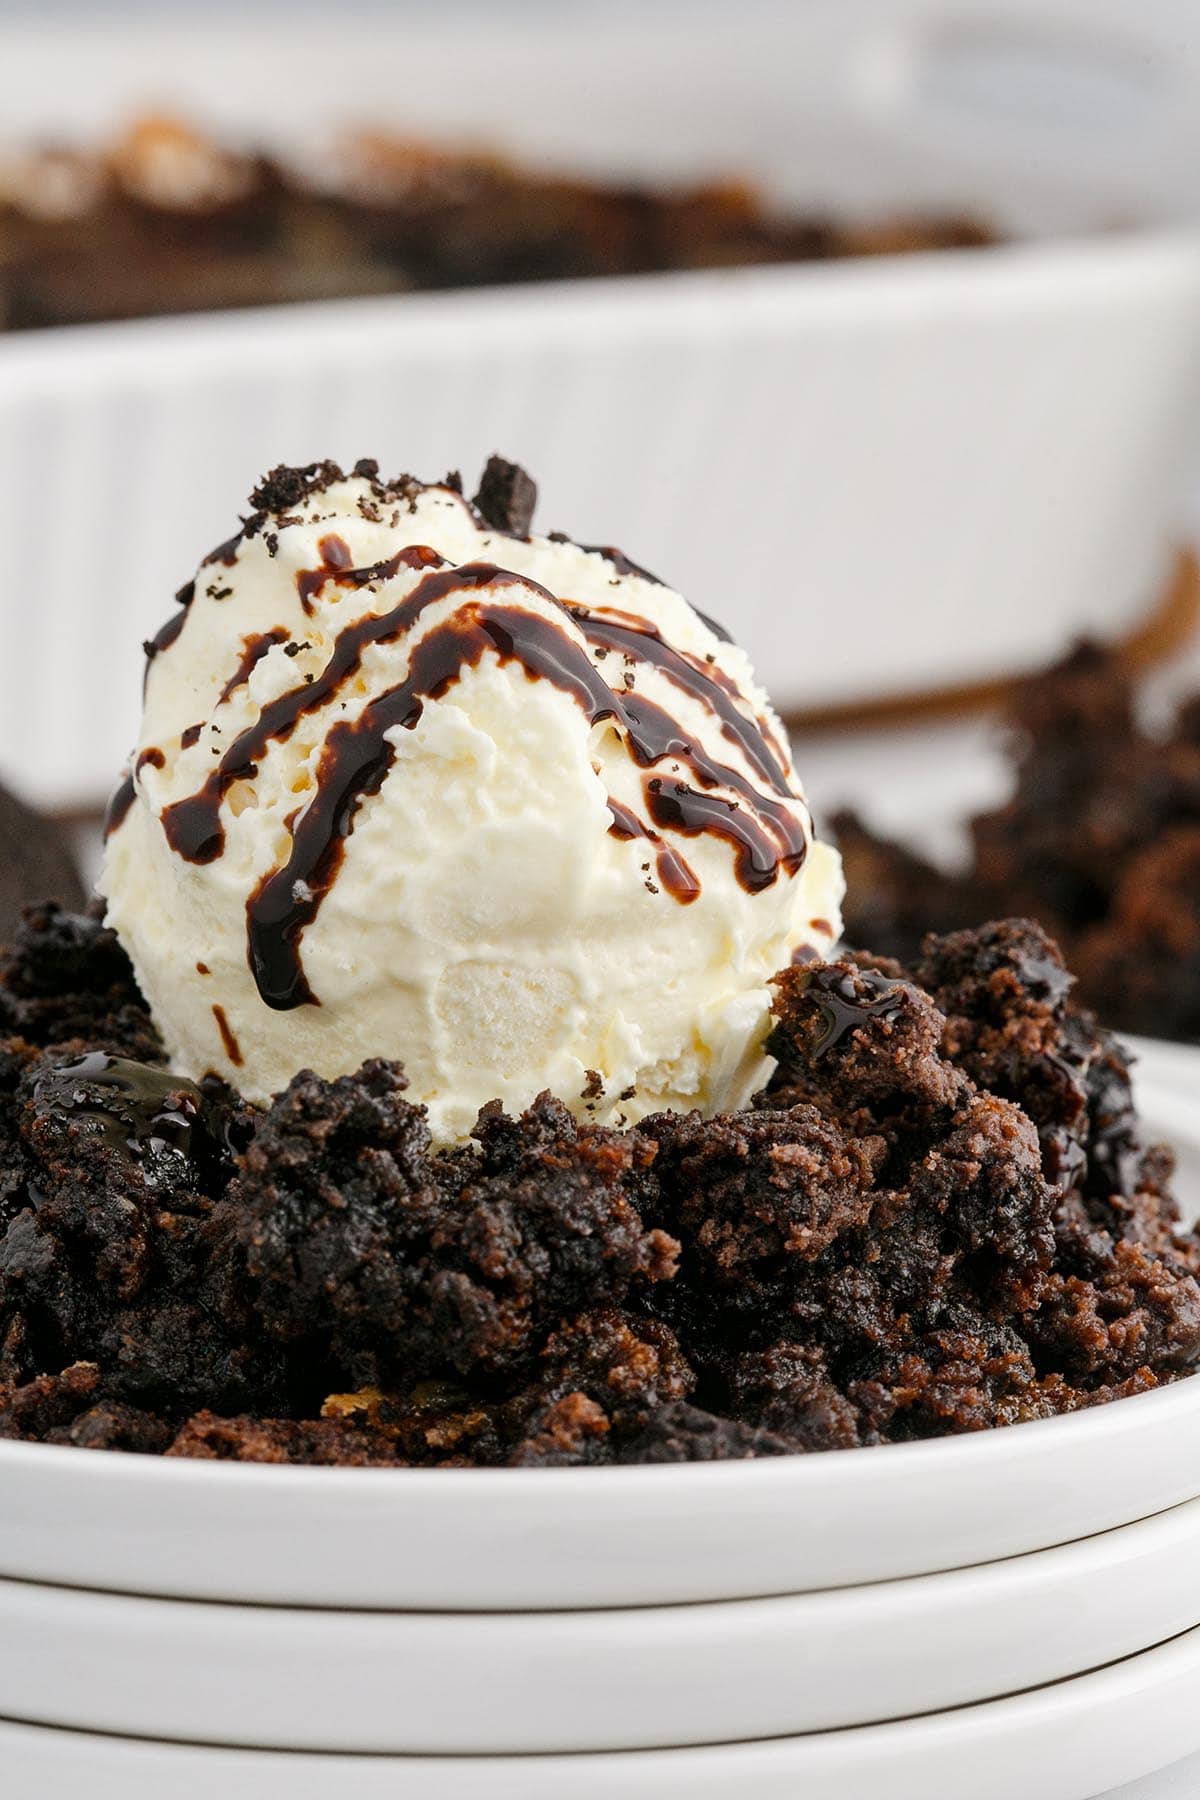 Oreo Dump Cake with ice cream and drizzled chocolate sauce on top.